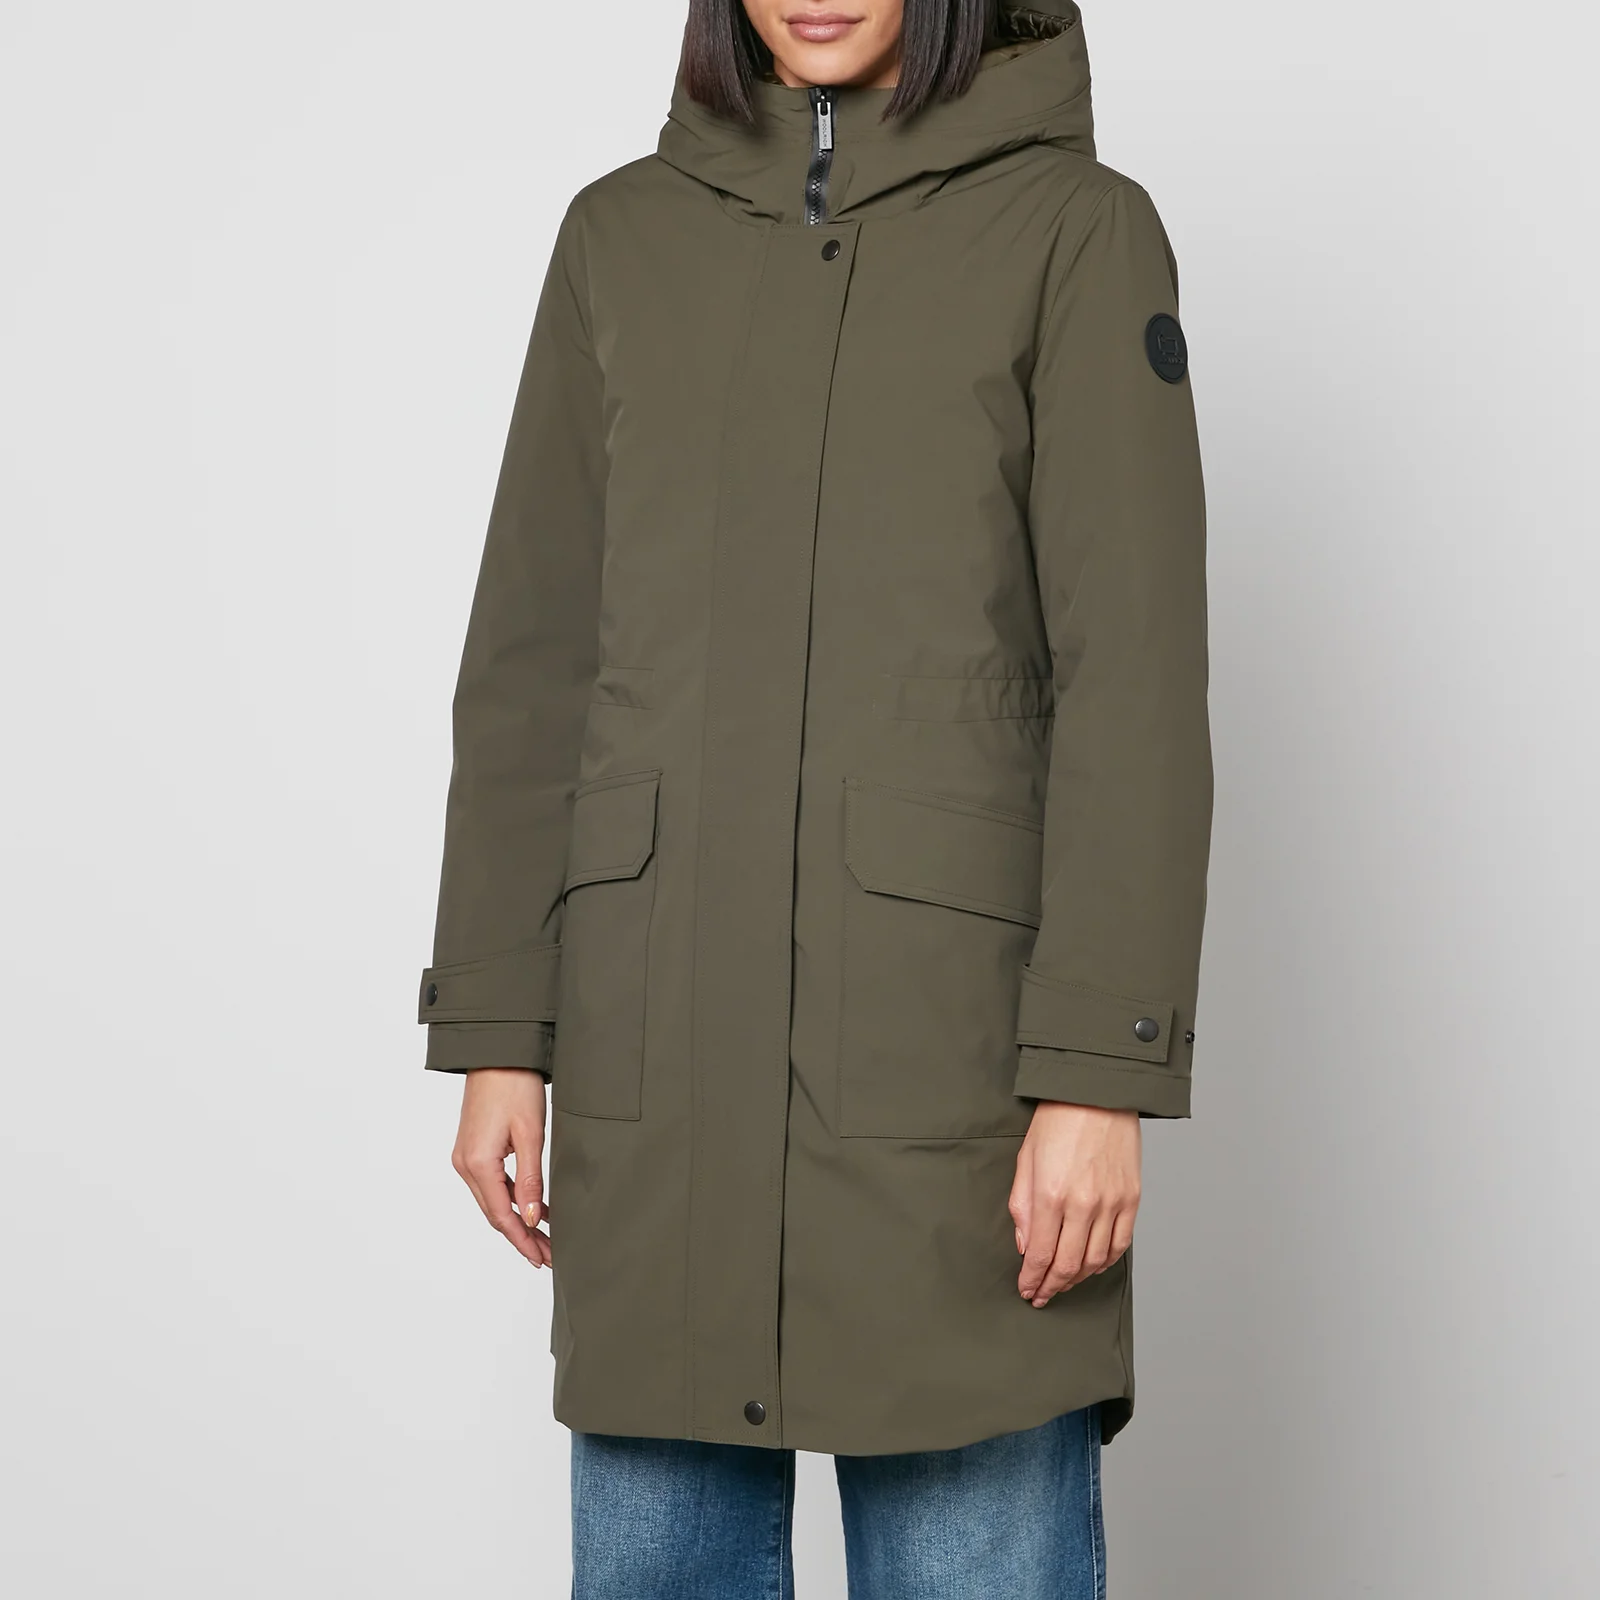 Woolrich Long Military 3-in-1 Parka Coat Image 1